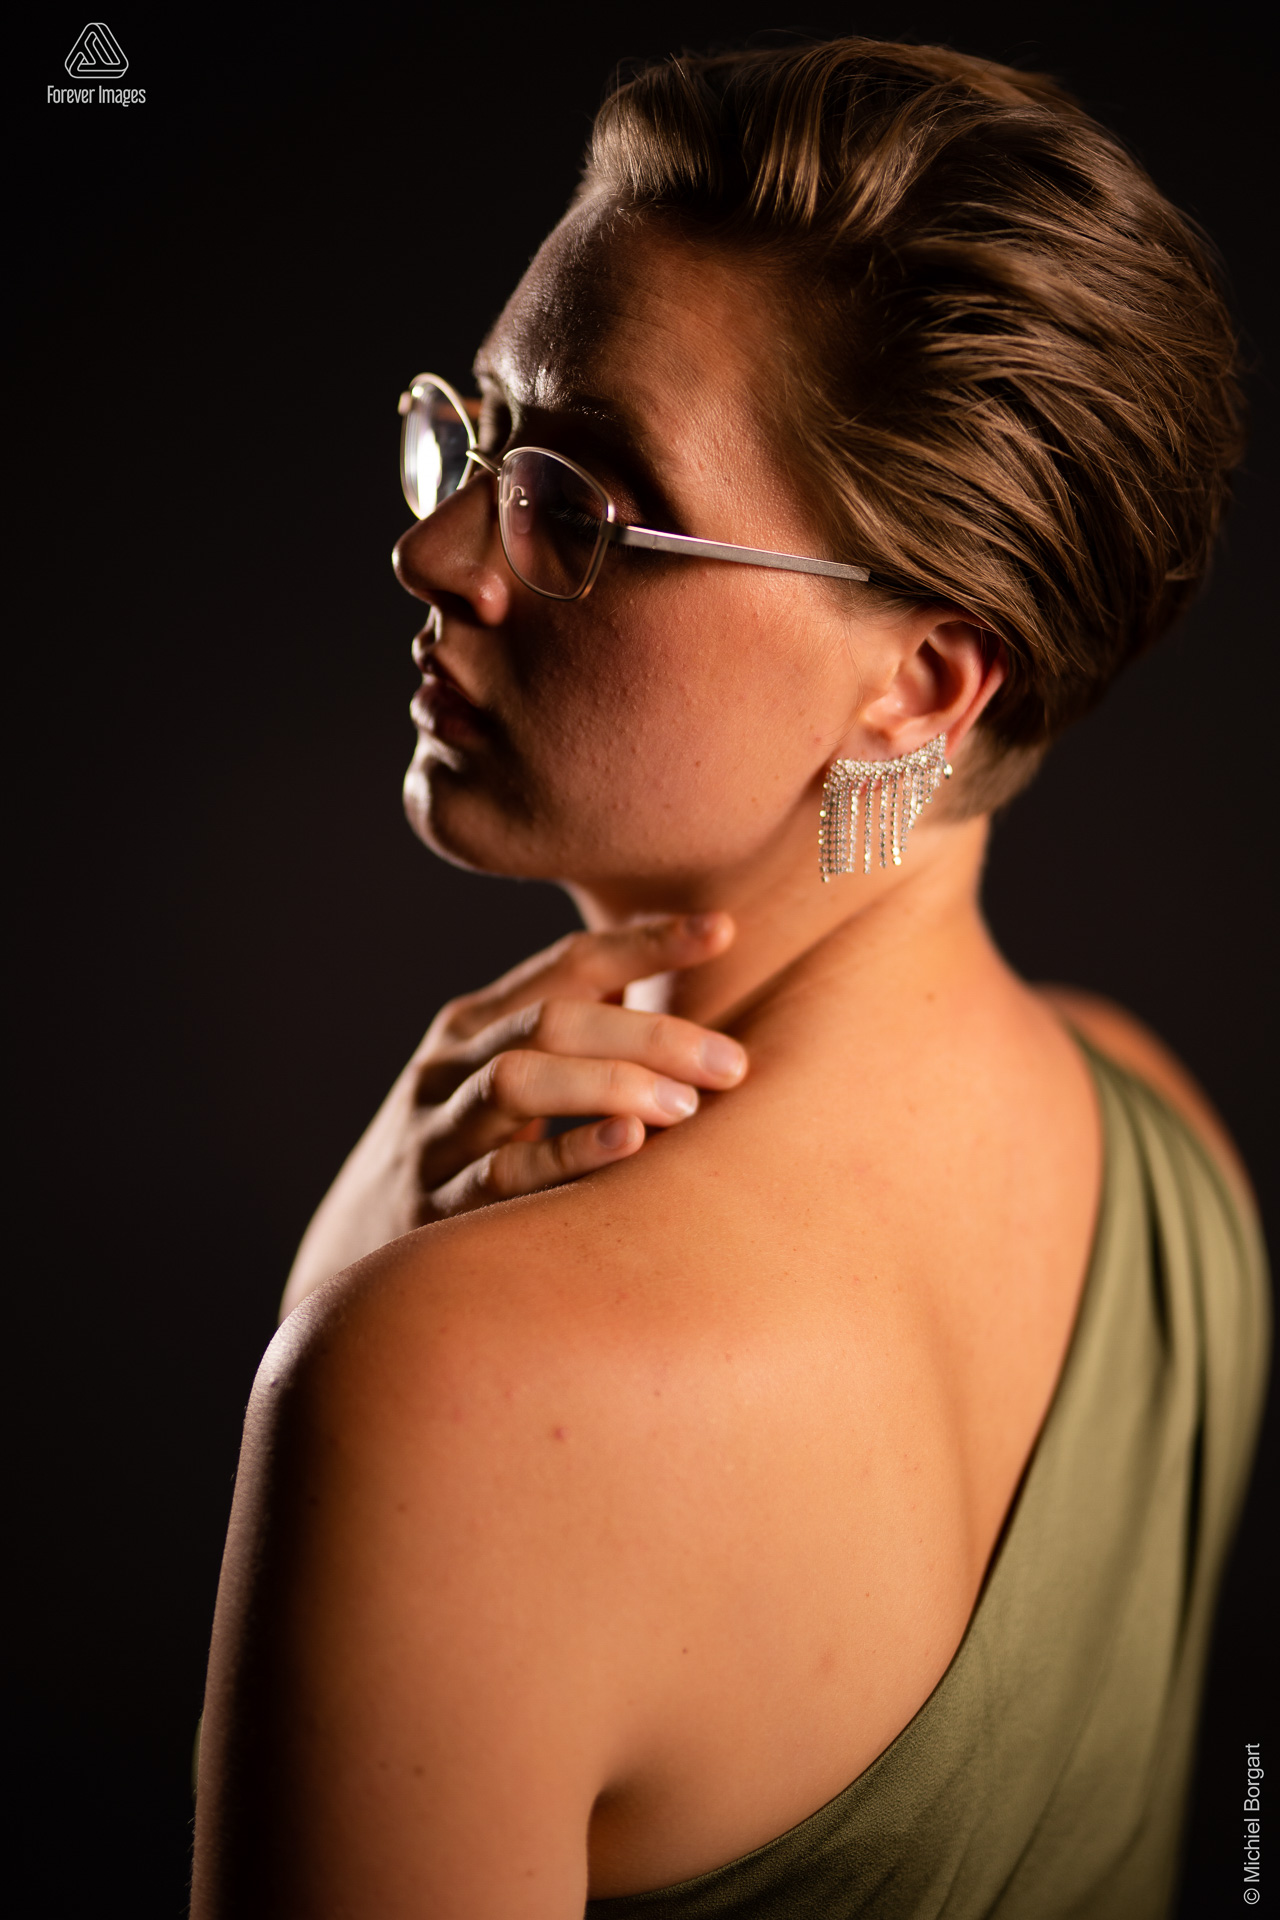 Portrait photo young lady beautiful green dress with open back glasses earrings hand in neck | Carmen | Portrait Photographer Michiel Borgart - Forever Images.